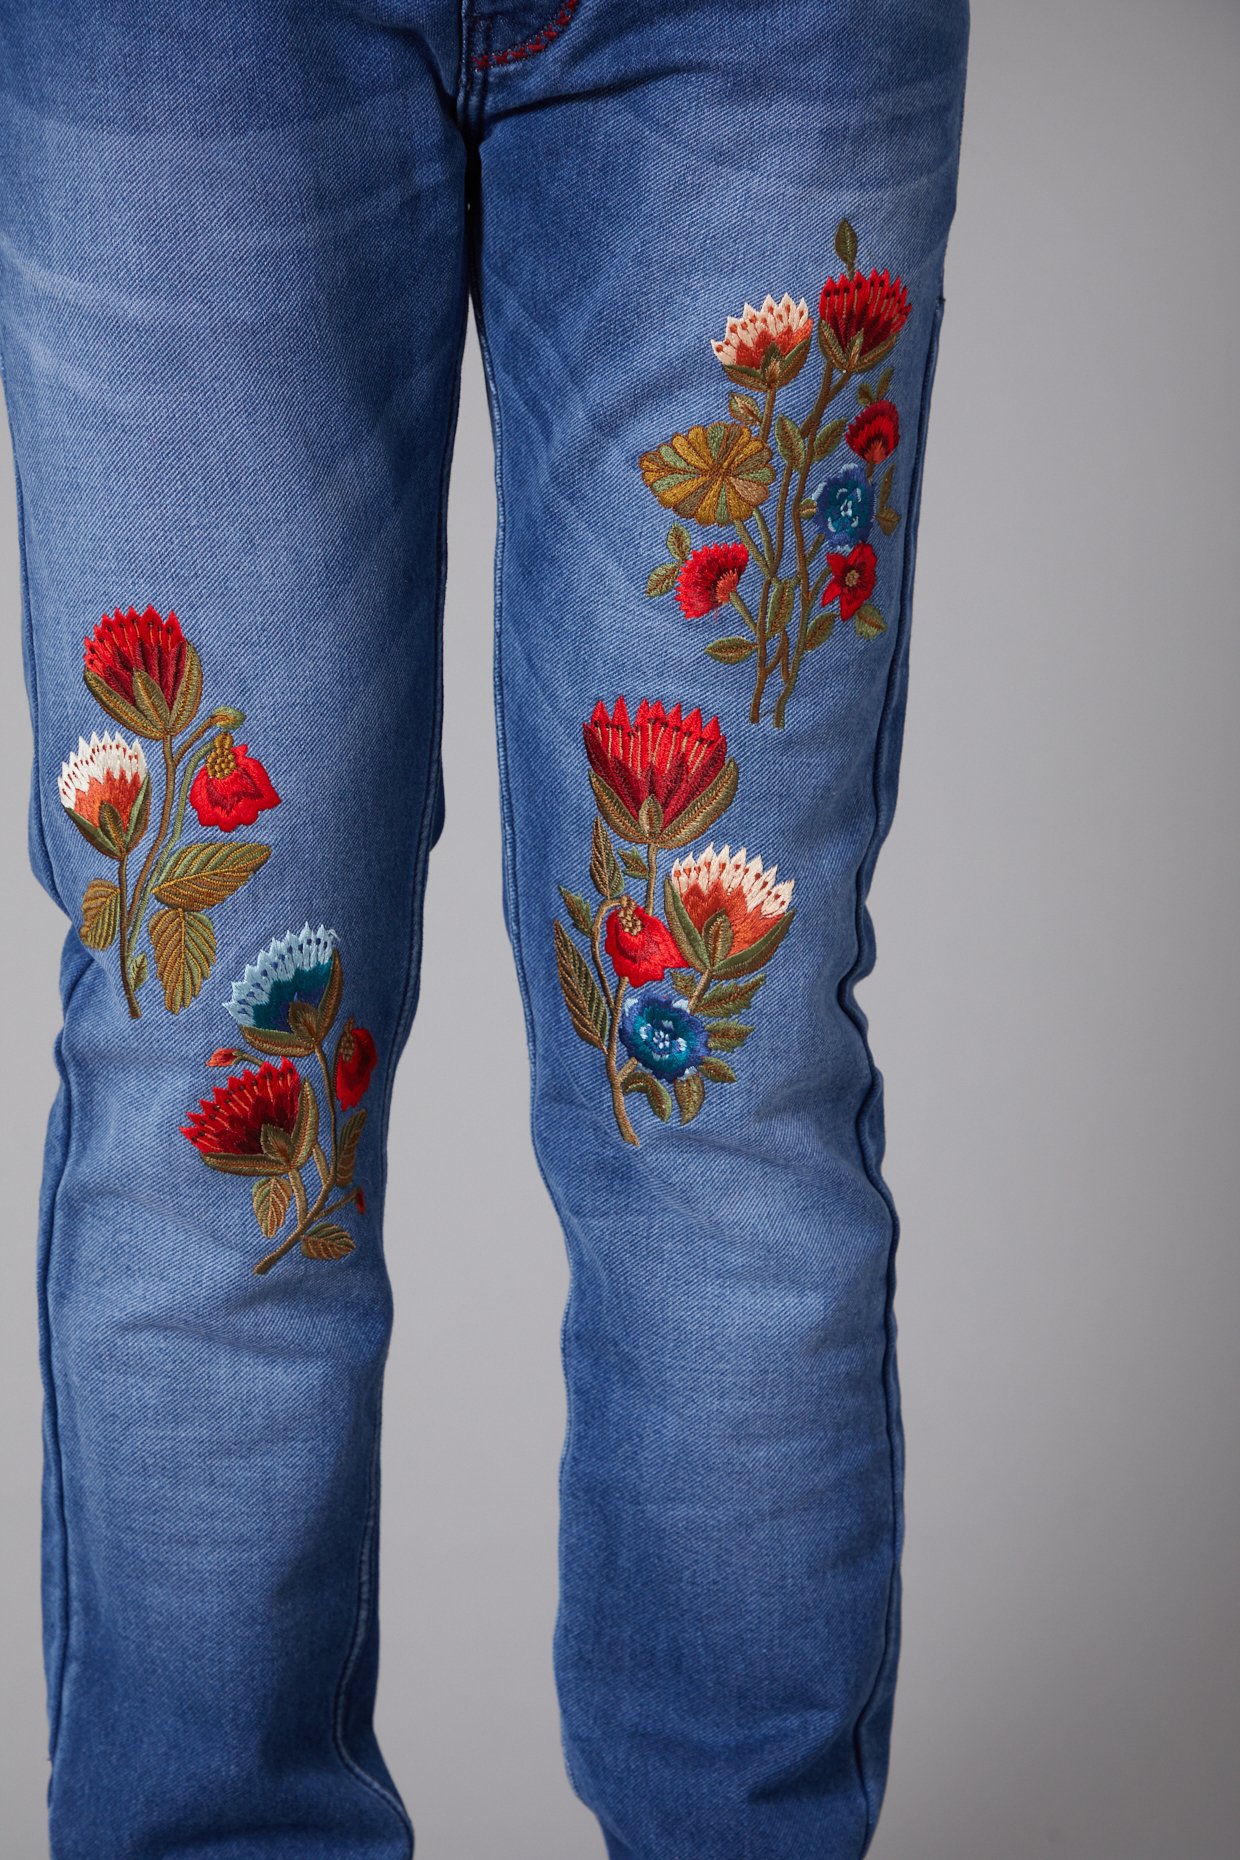 Flower Print Embroidery Jeans by RohitBal - Rohit Bal